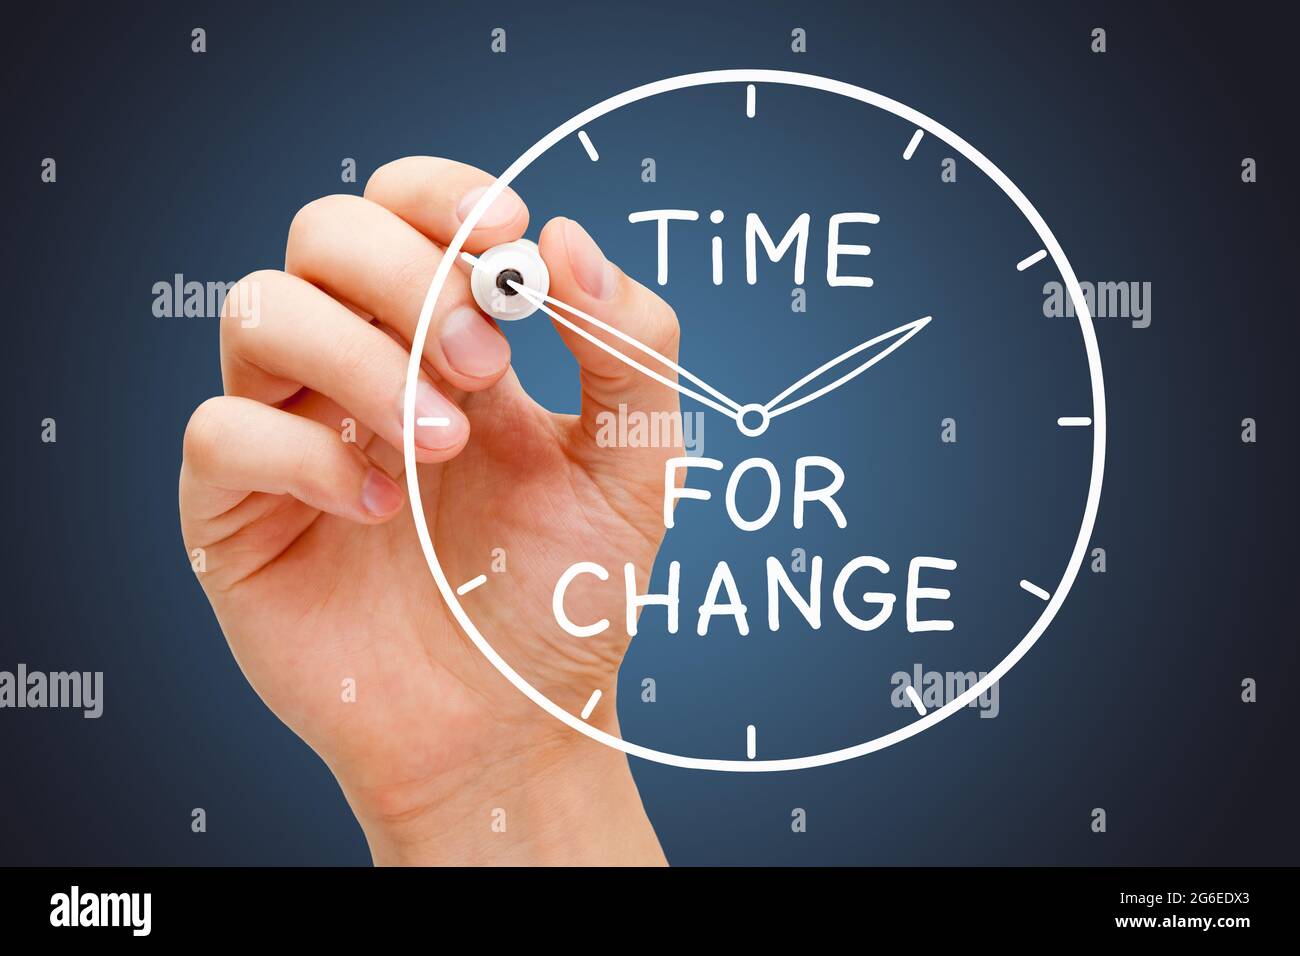 Hand writing Time for Change on a drawn clock with white marker on transparent wipe board. Concept about progress, adaptation and improvement. Stock Photo